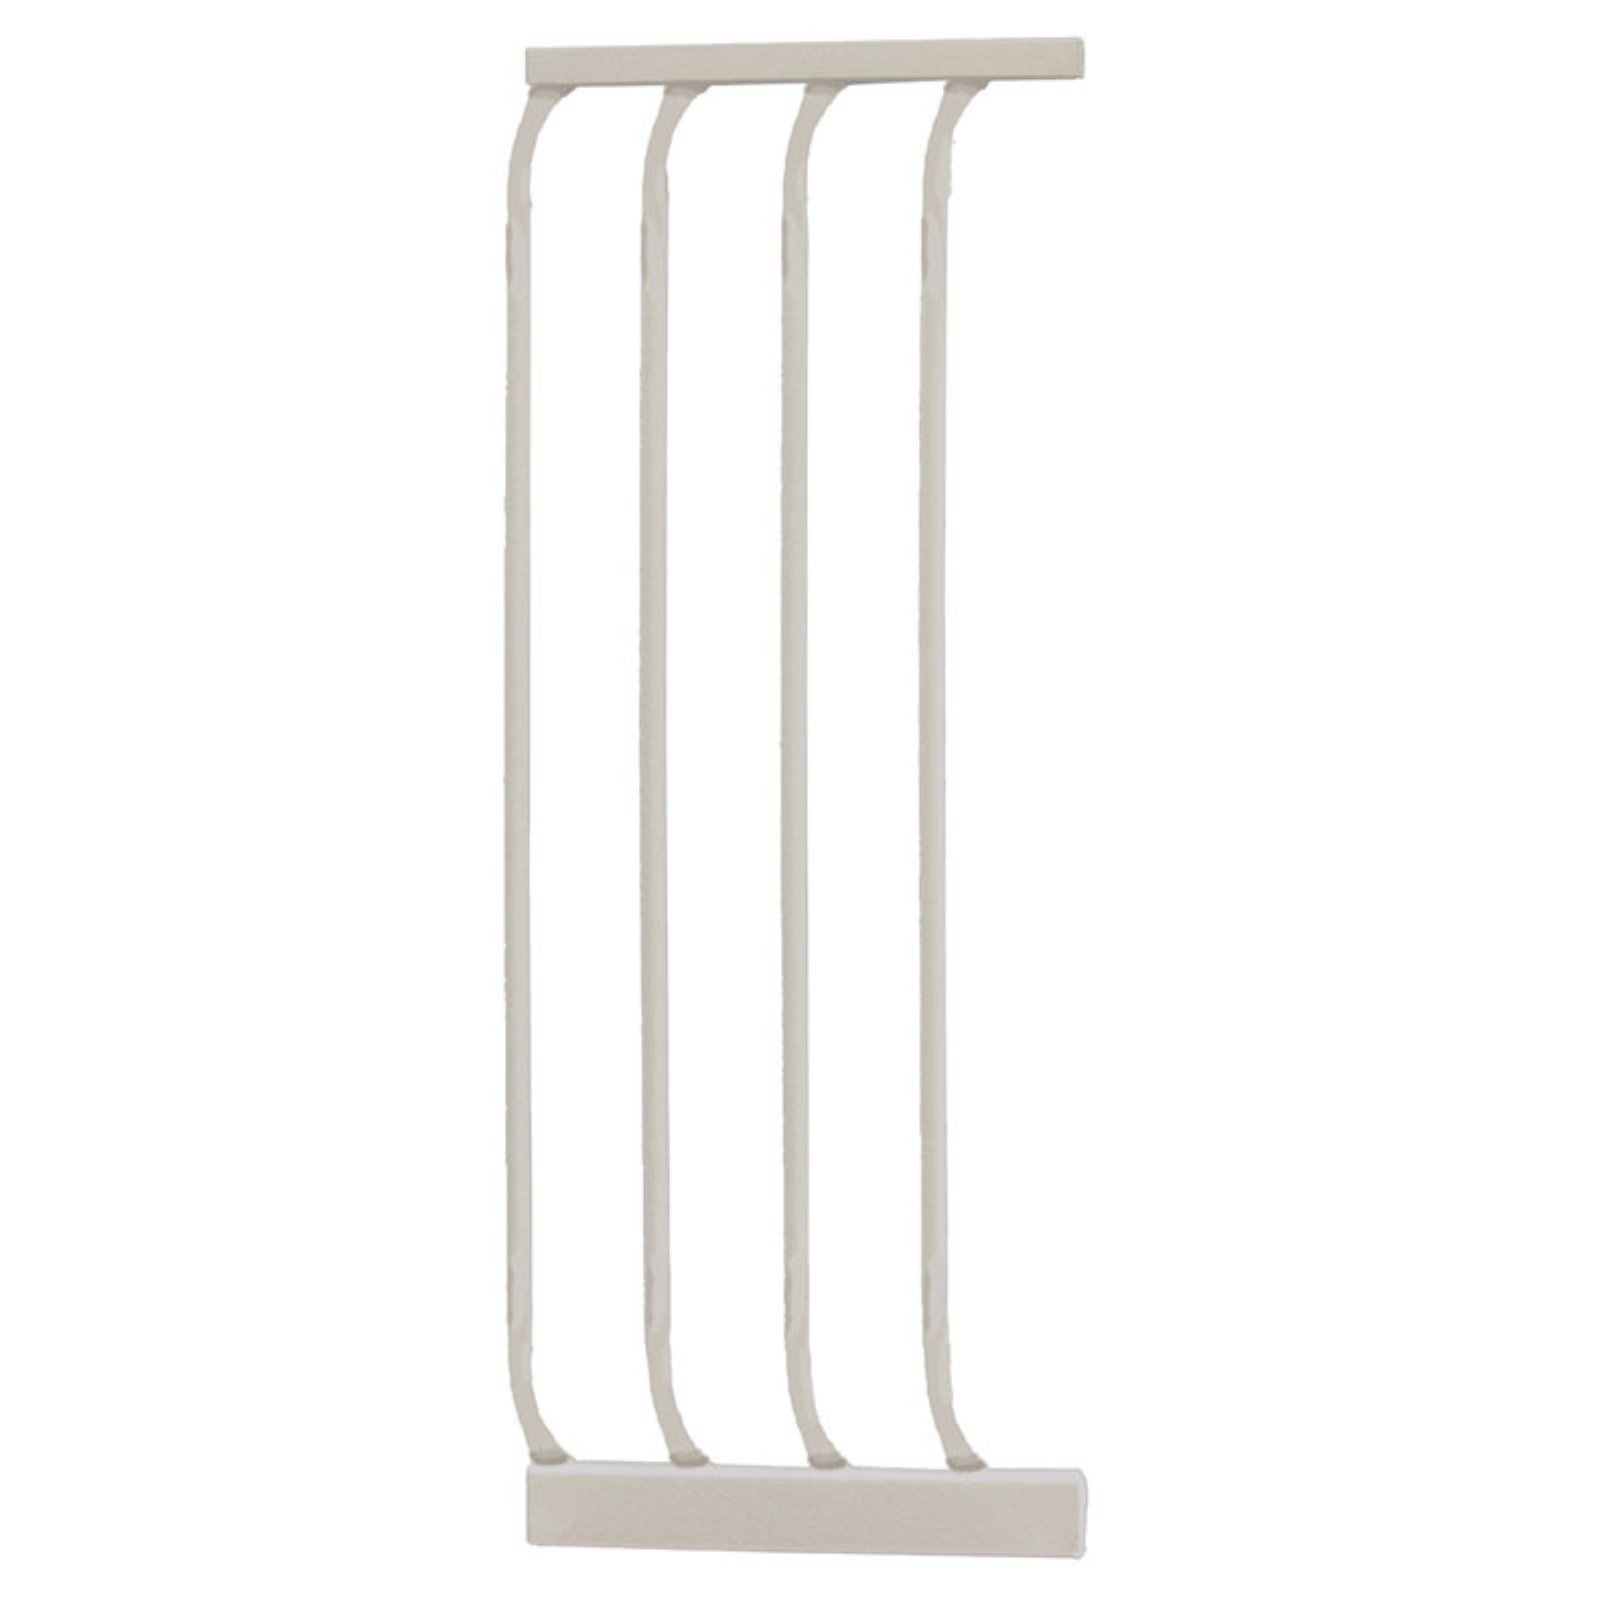 Dreambaby® Chelsea 10.5 inch Baby Gate Extension - image 1 of 2